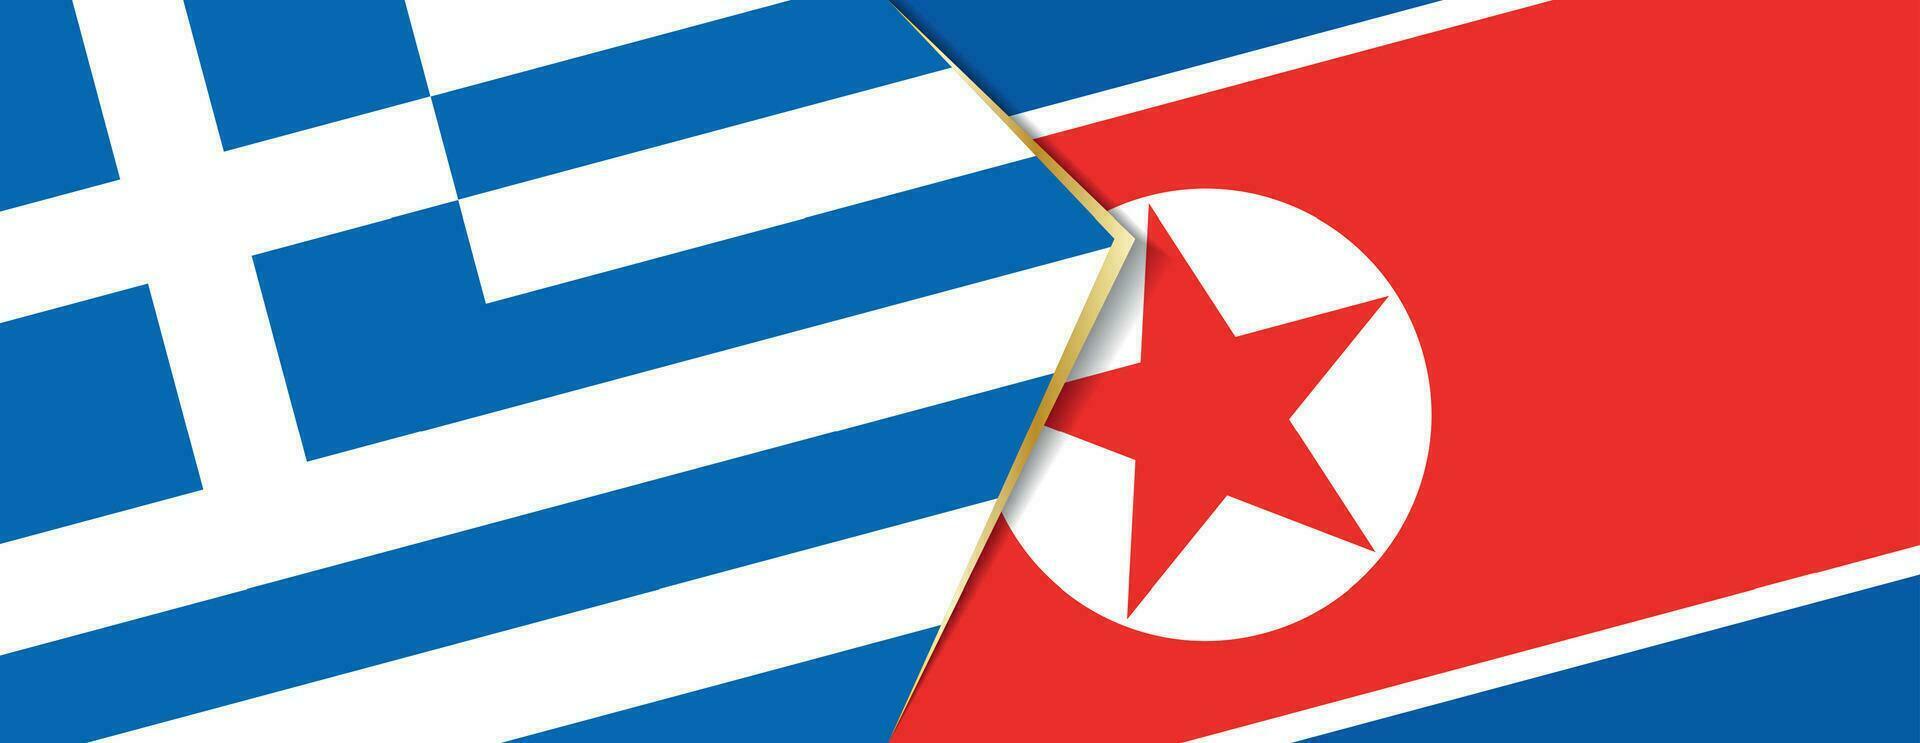 Greece and North Korea flags, two vector flags.